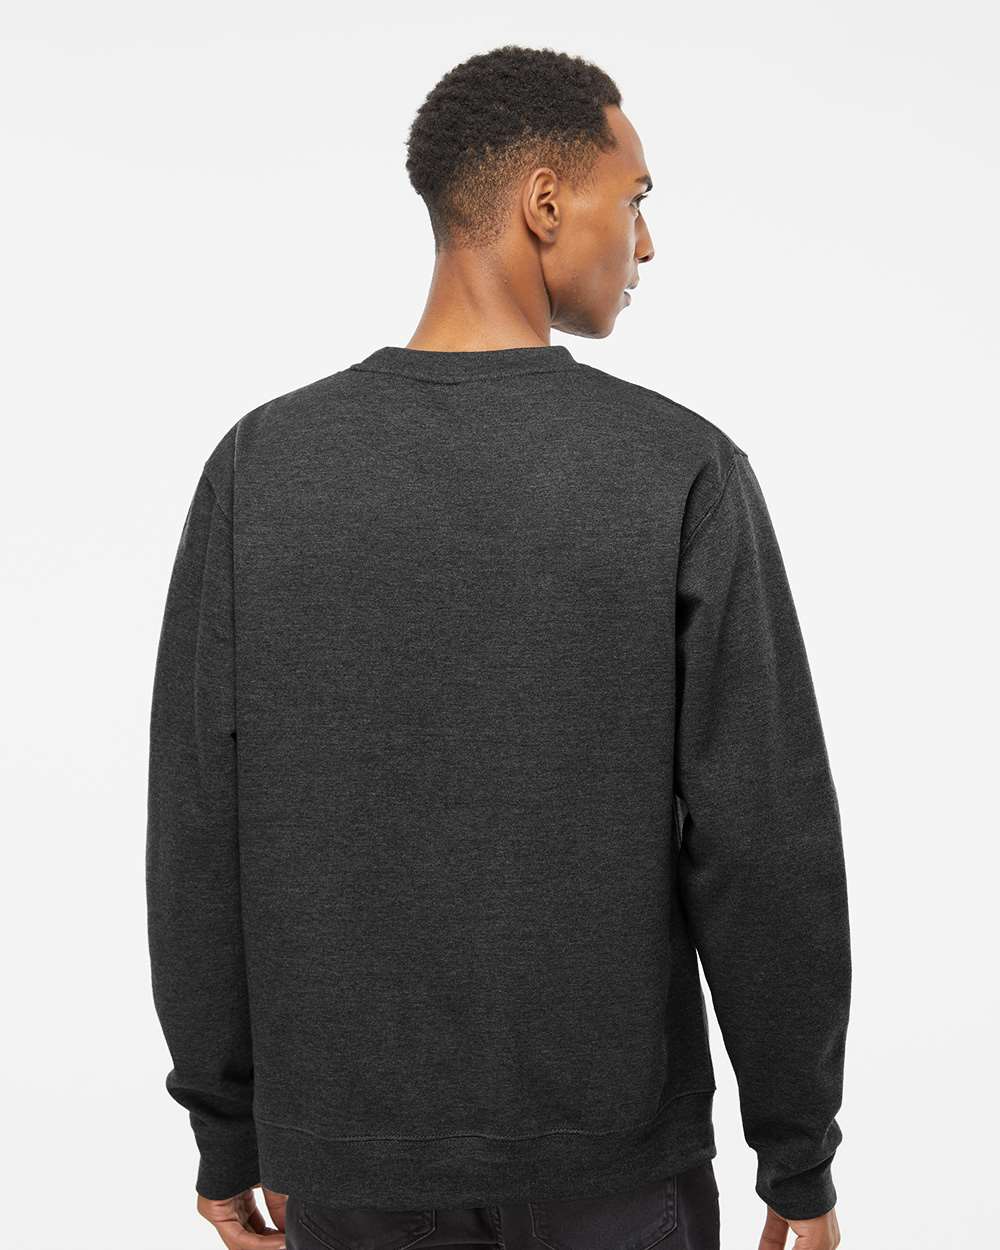 Independent Trading Co. Midweight Sweatshirt SS3000 #colormdl_Charcoal Heather